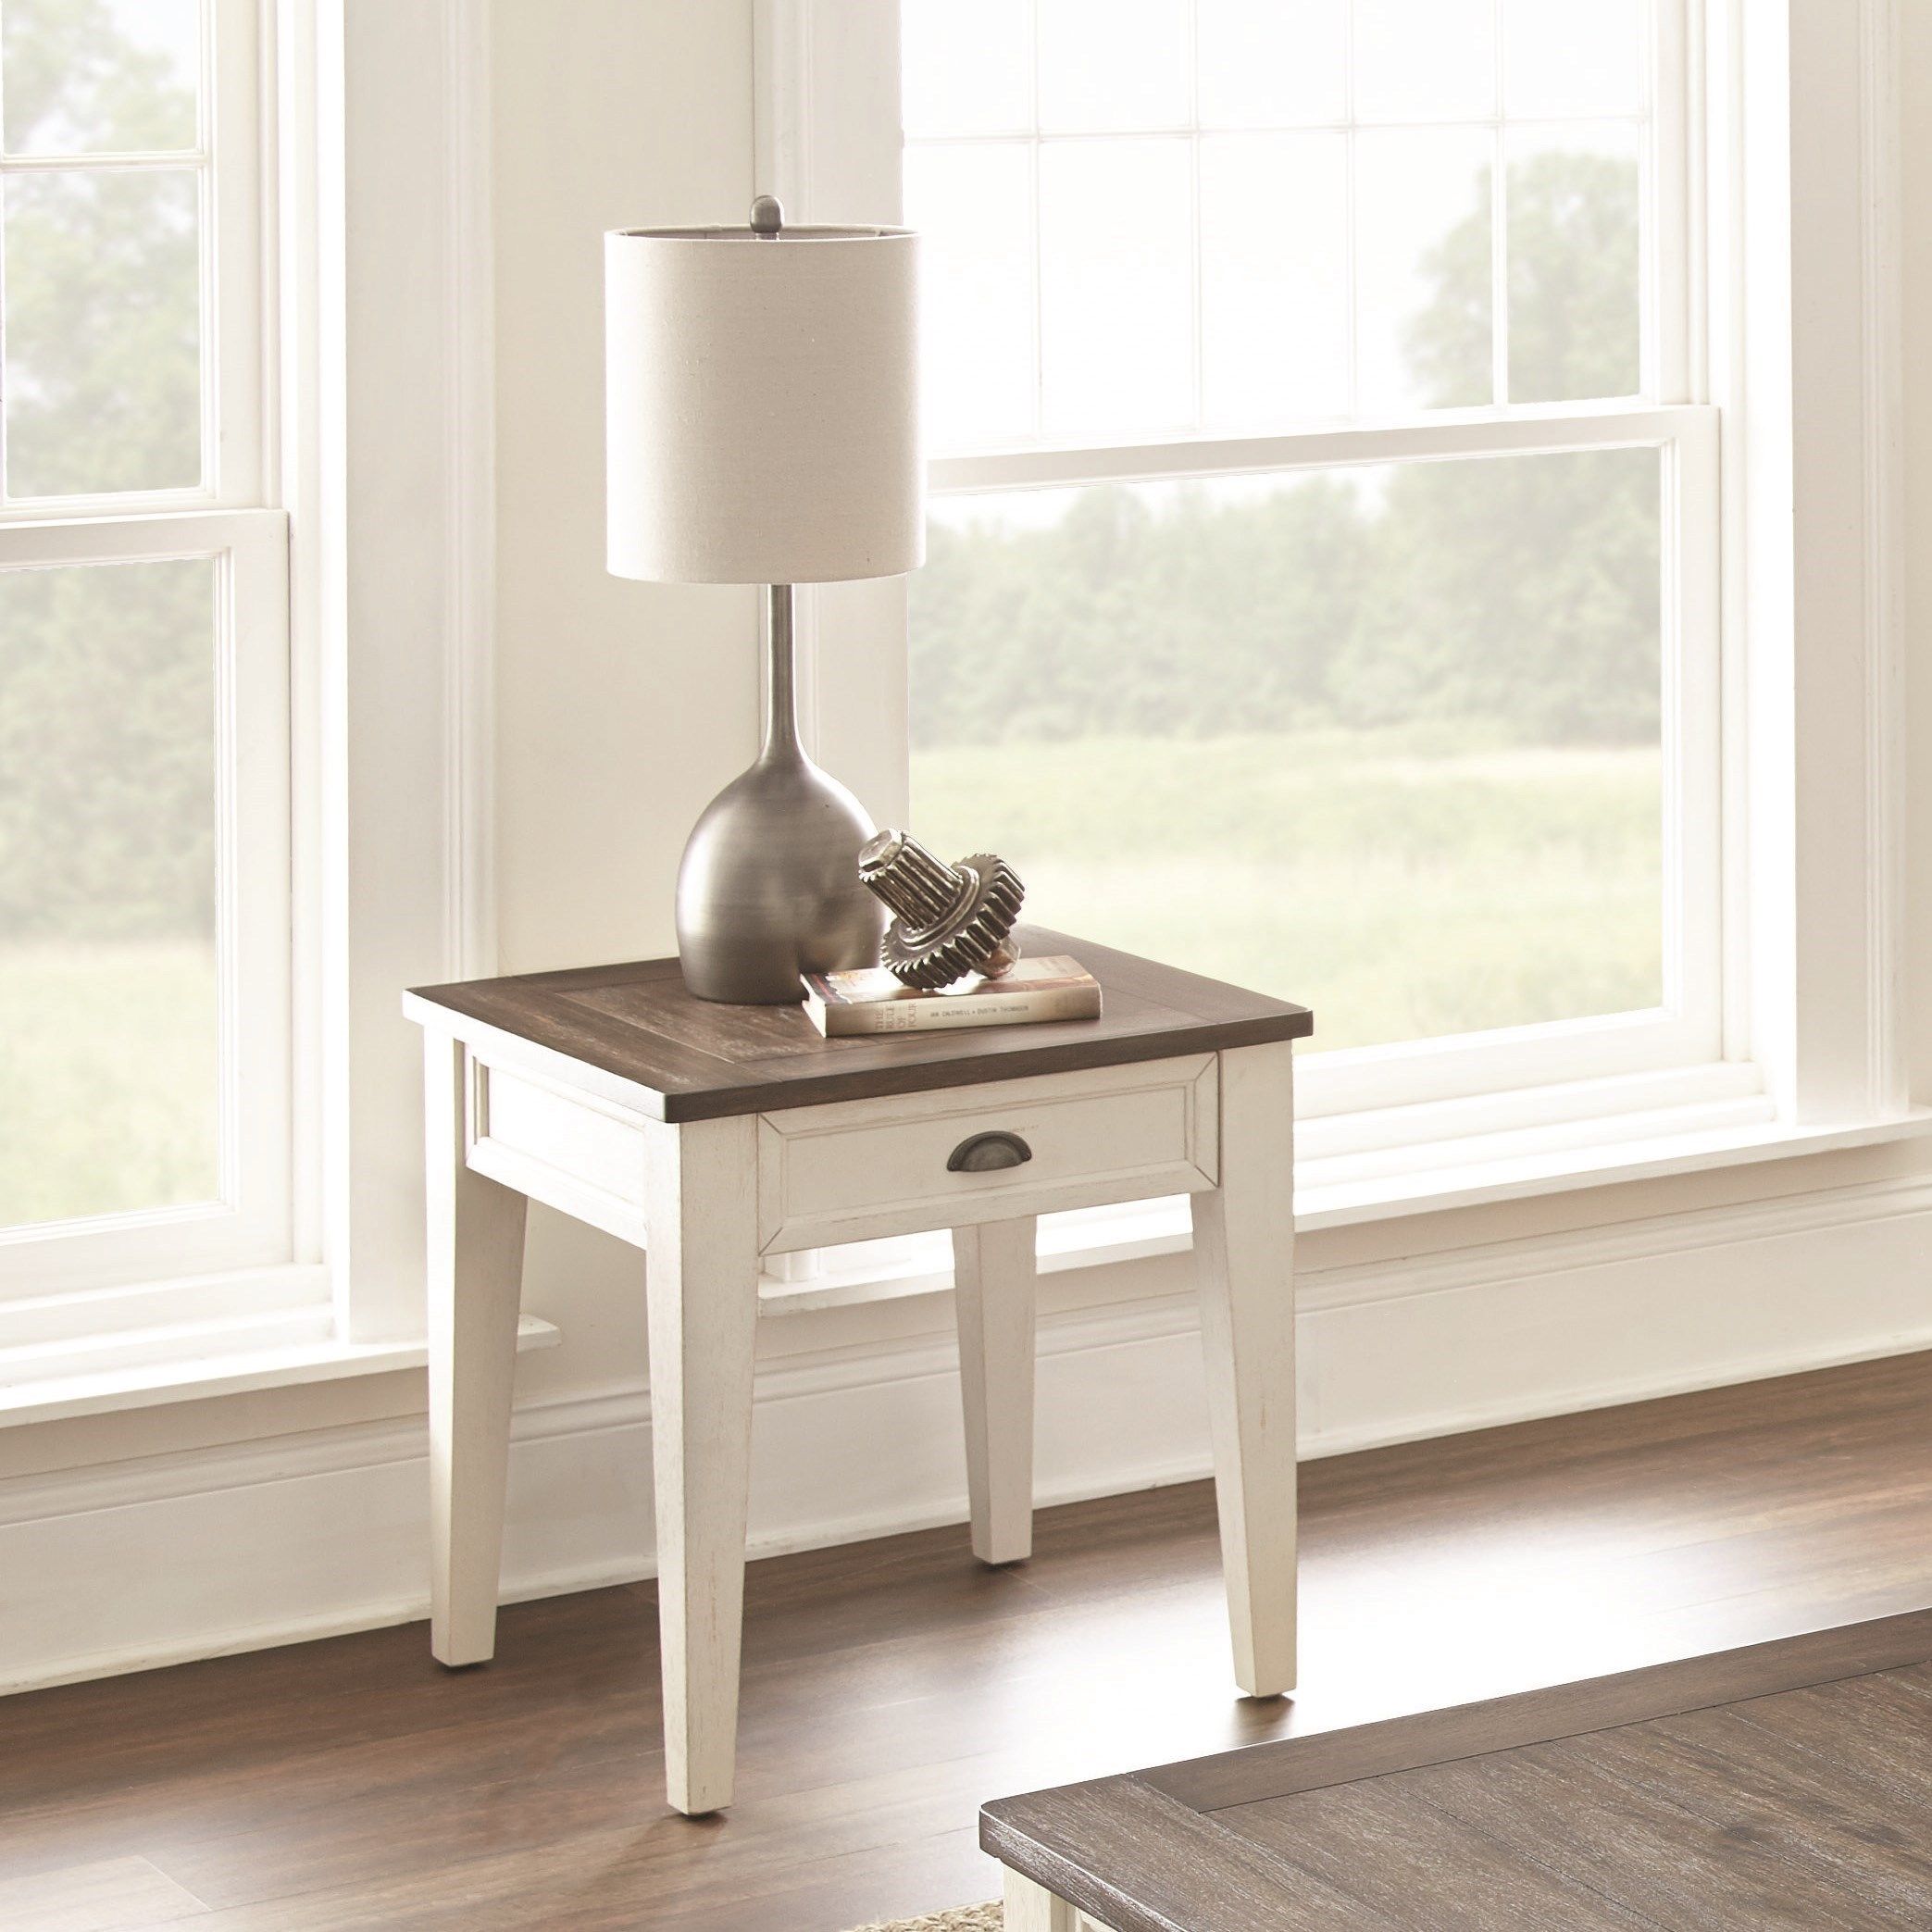 Steve Silver Clifton 949529079 Farmhouse End Table With Two Tone Finish |  Morris Home | End Tables Regarding Living Room Farmhouse Coffee Tables (View 9 of 15)